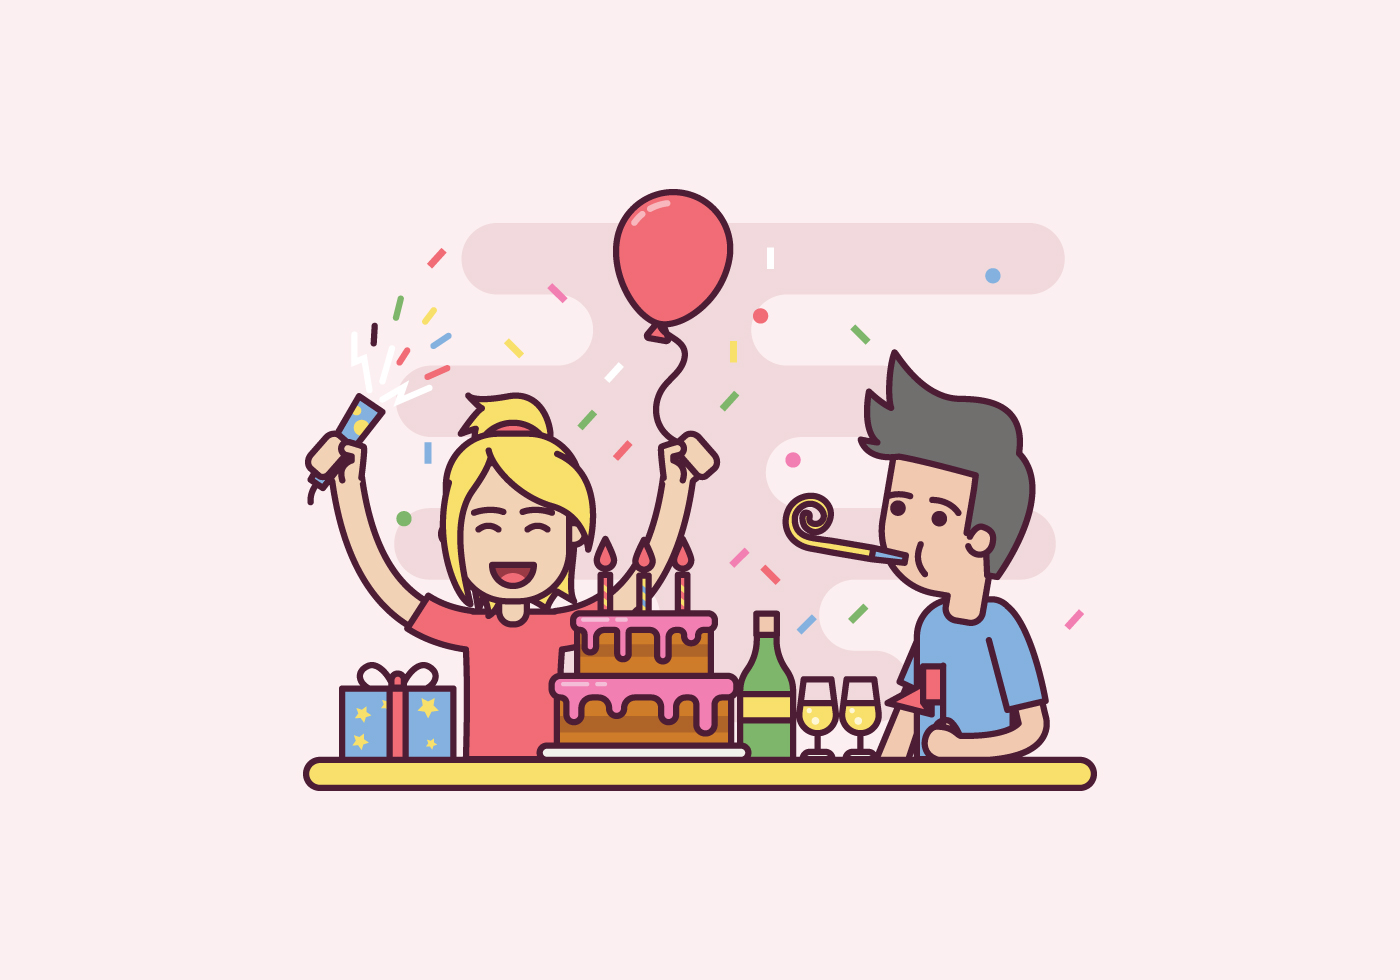 Download Free Birthday Party Illustration 135446 - Download Free Vectors, Clipart Graphics & Vector Art